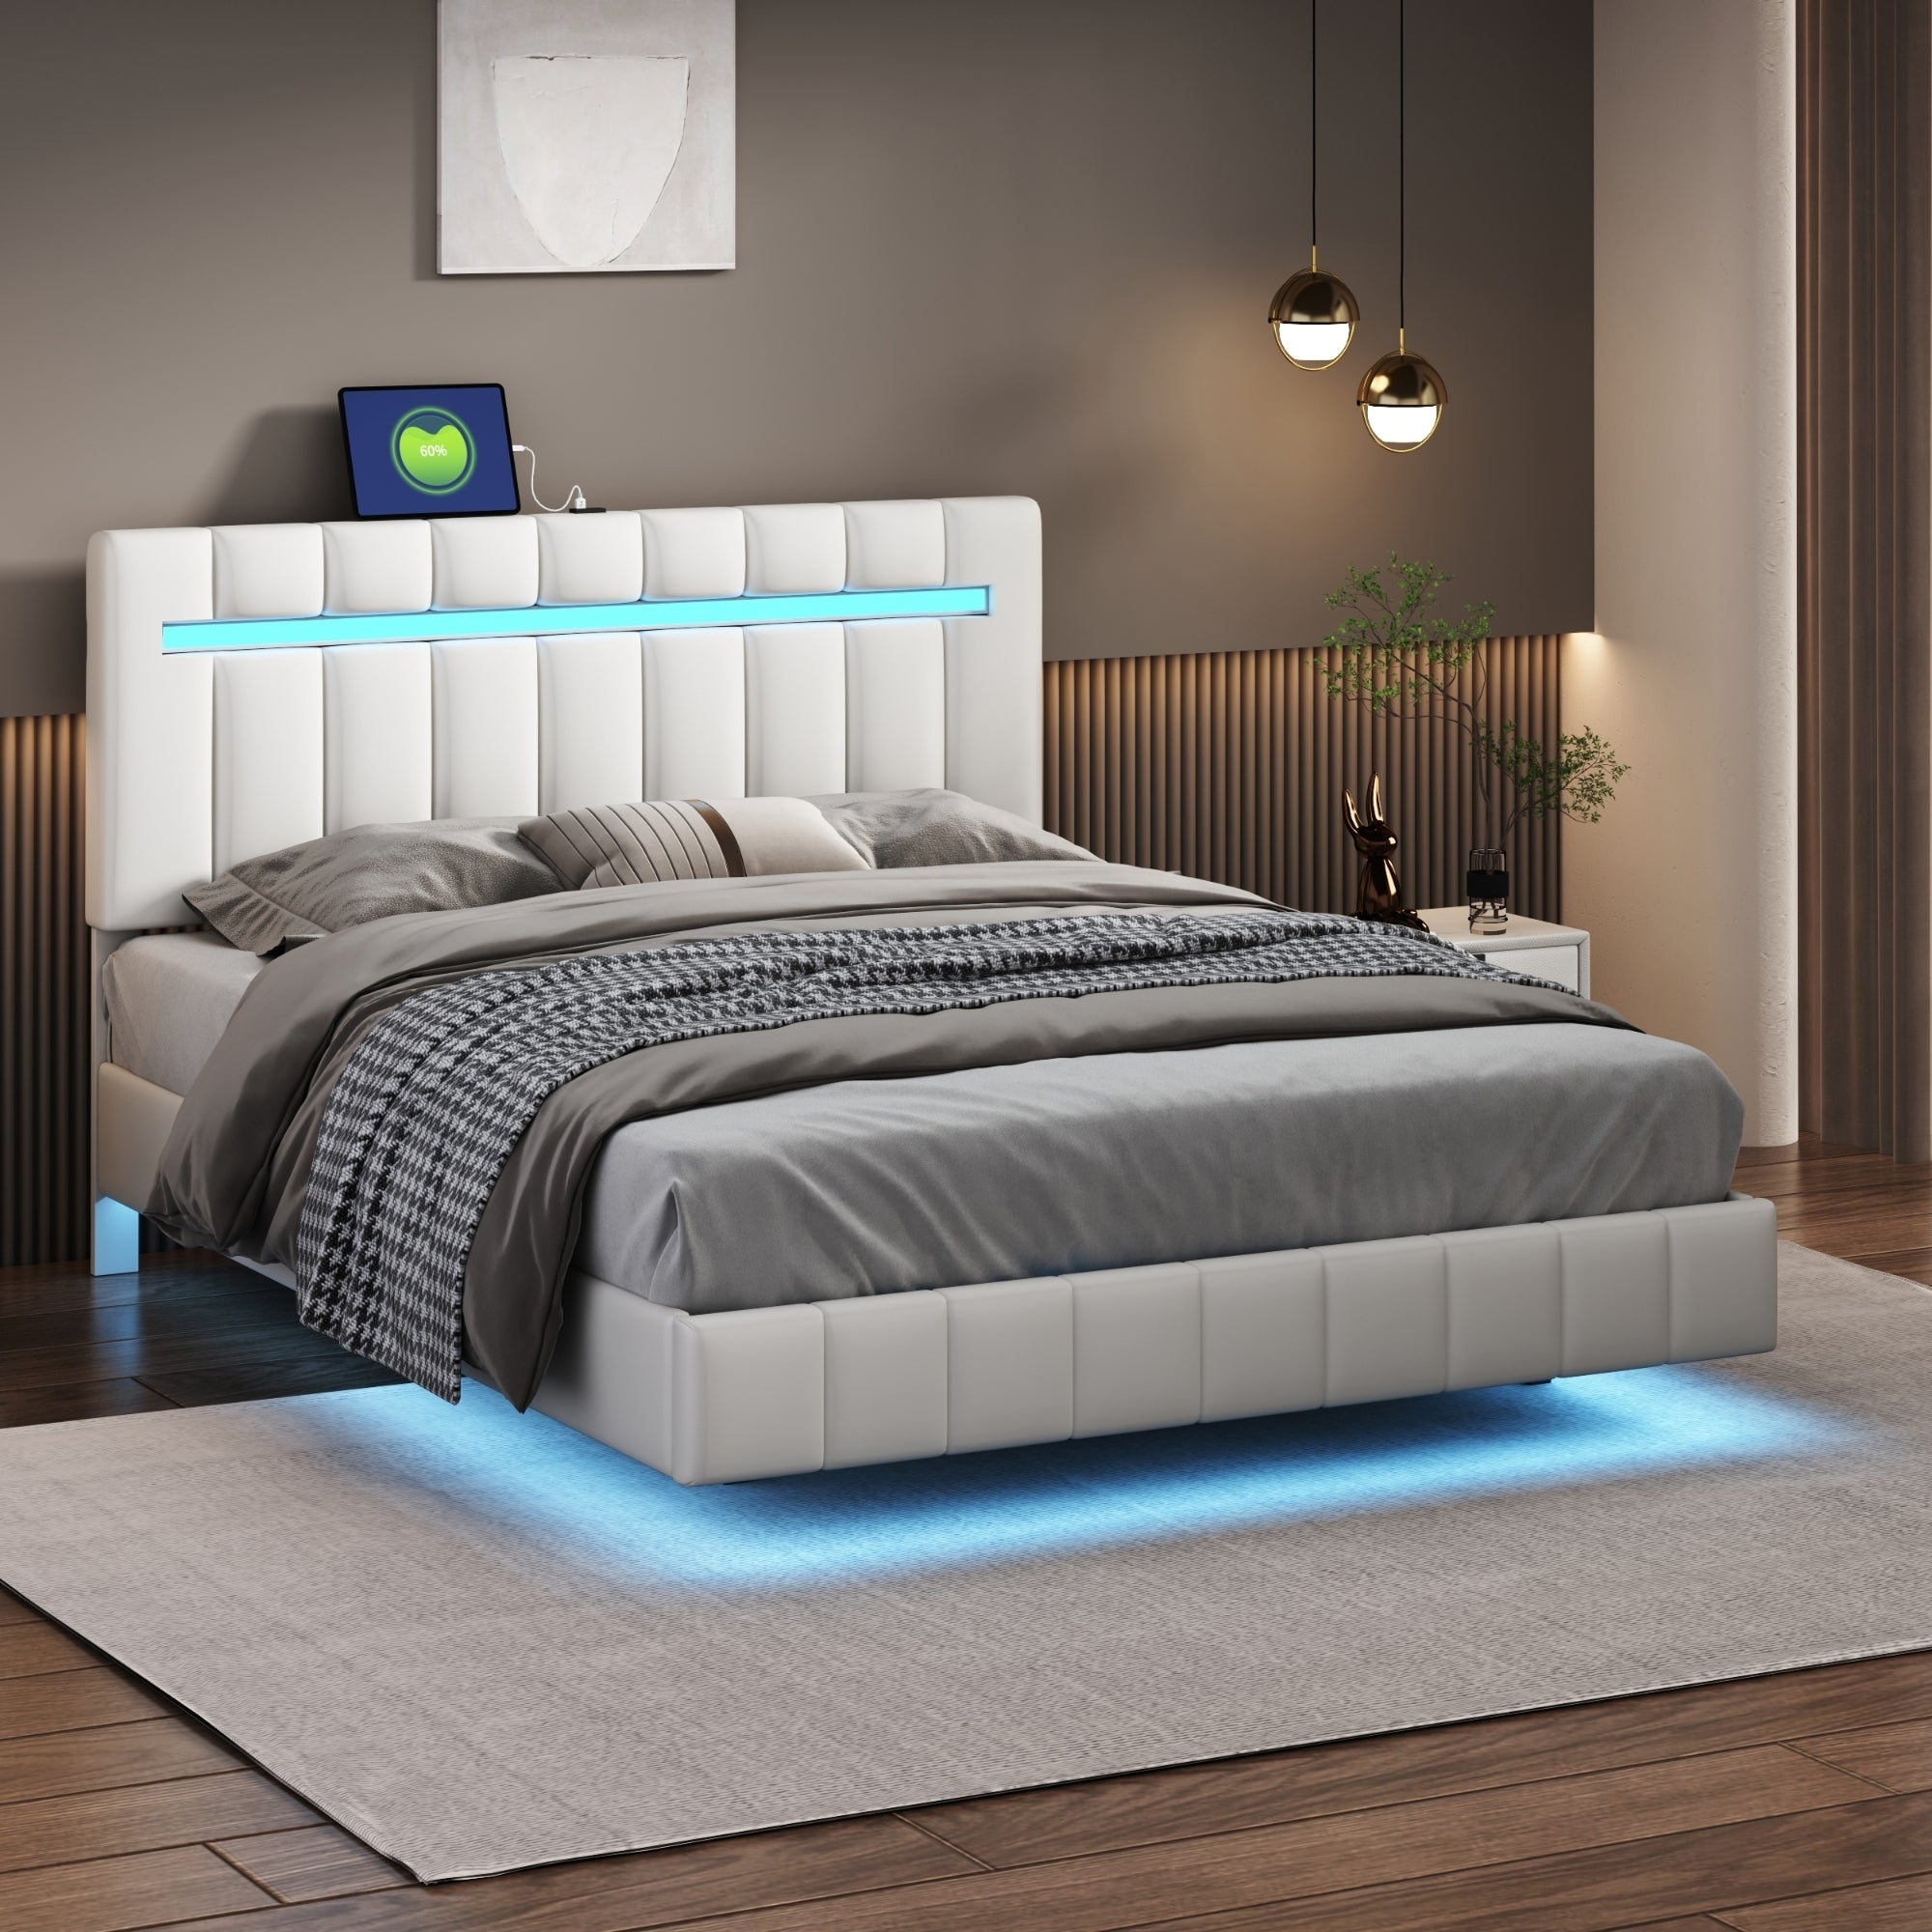 Lazio White Faux Leather Queen Floating Platform Bed with LED Lights and USB Charging